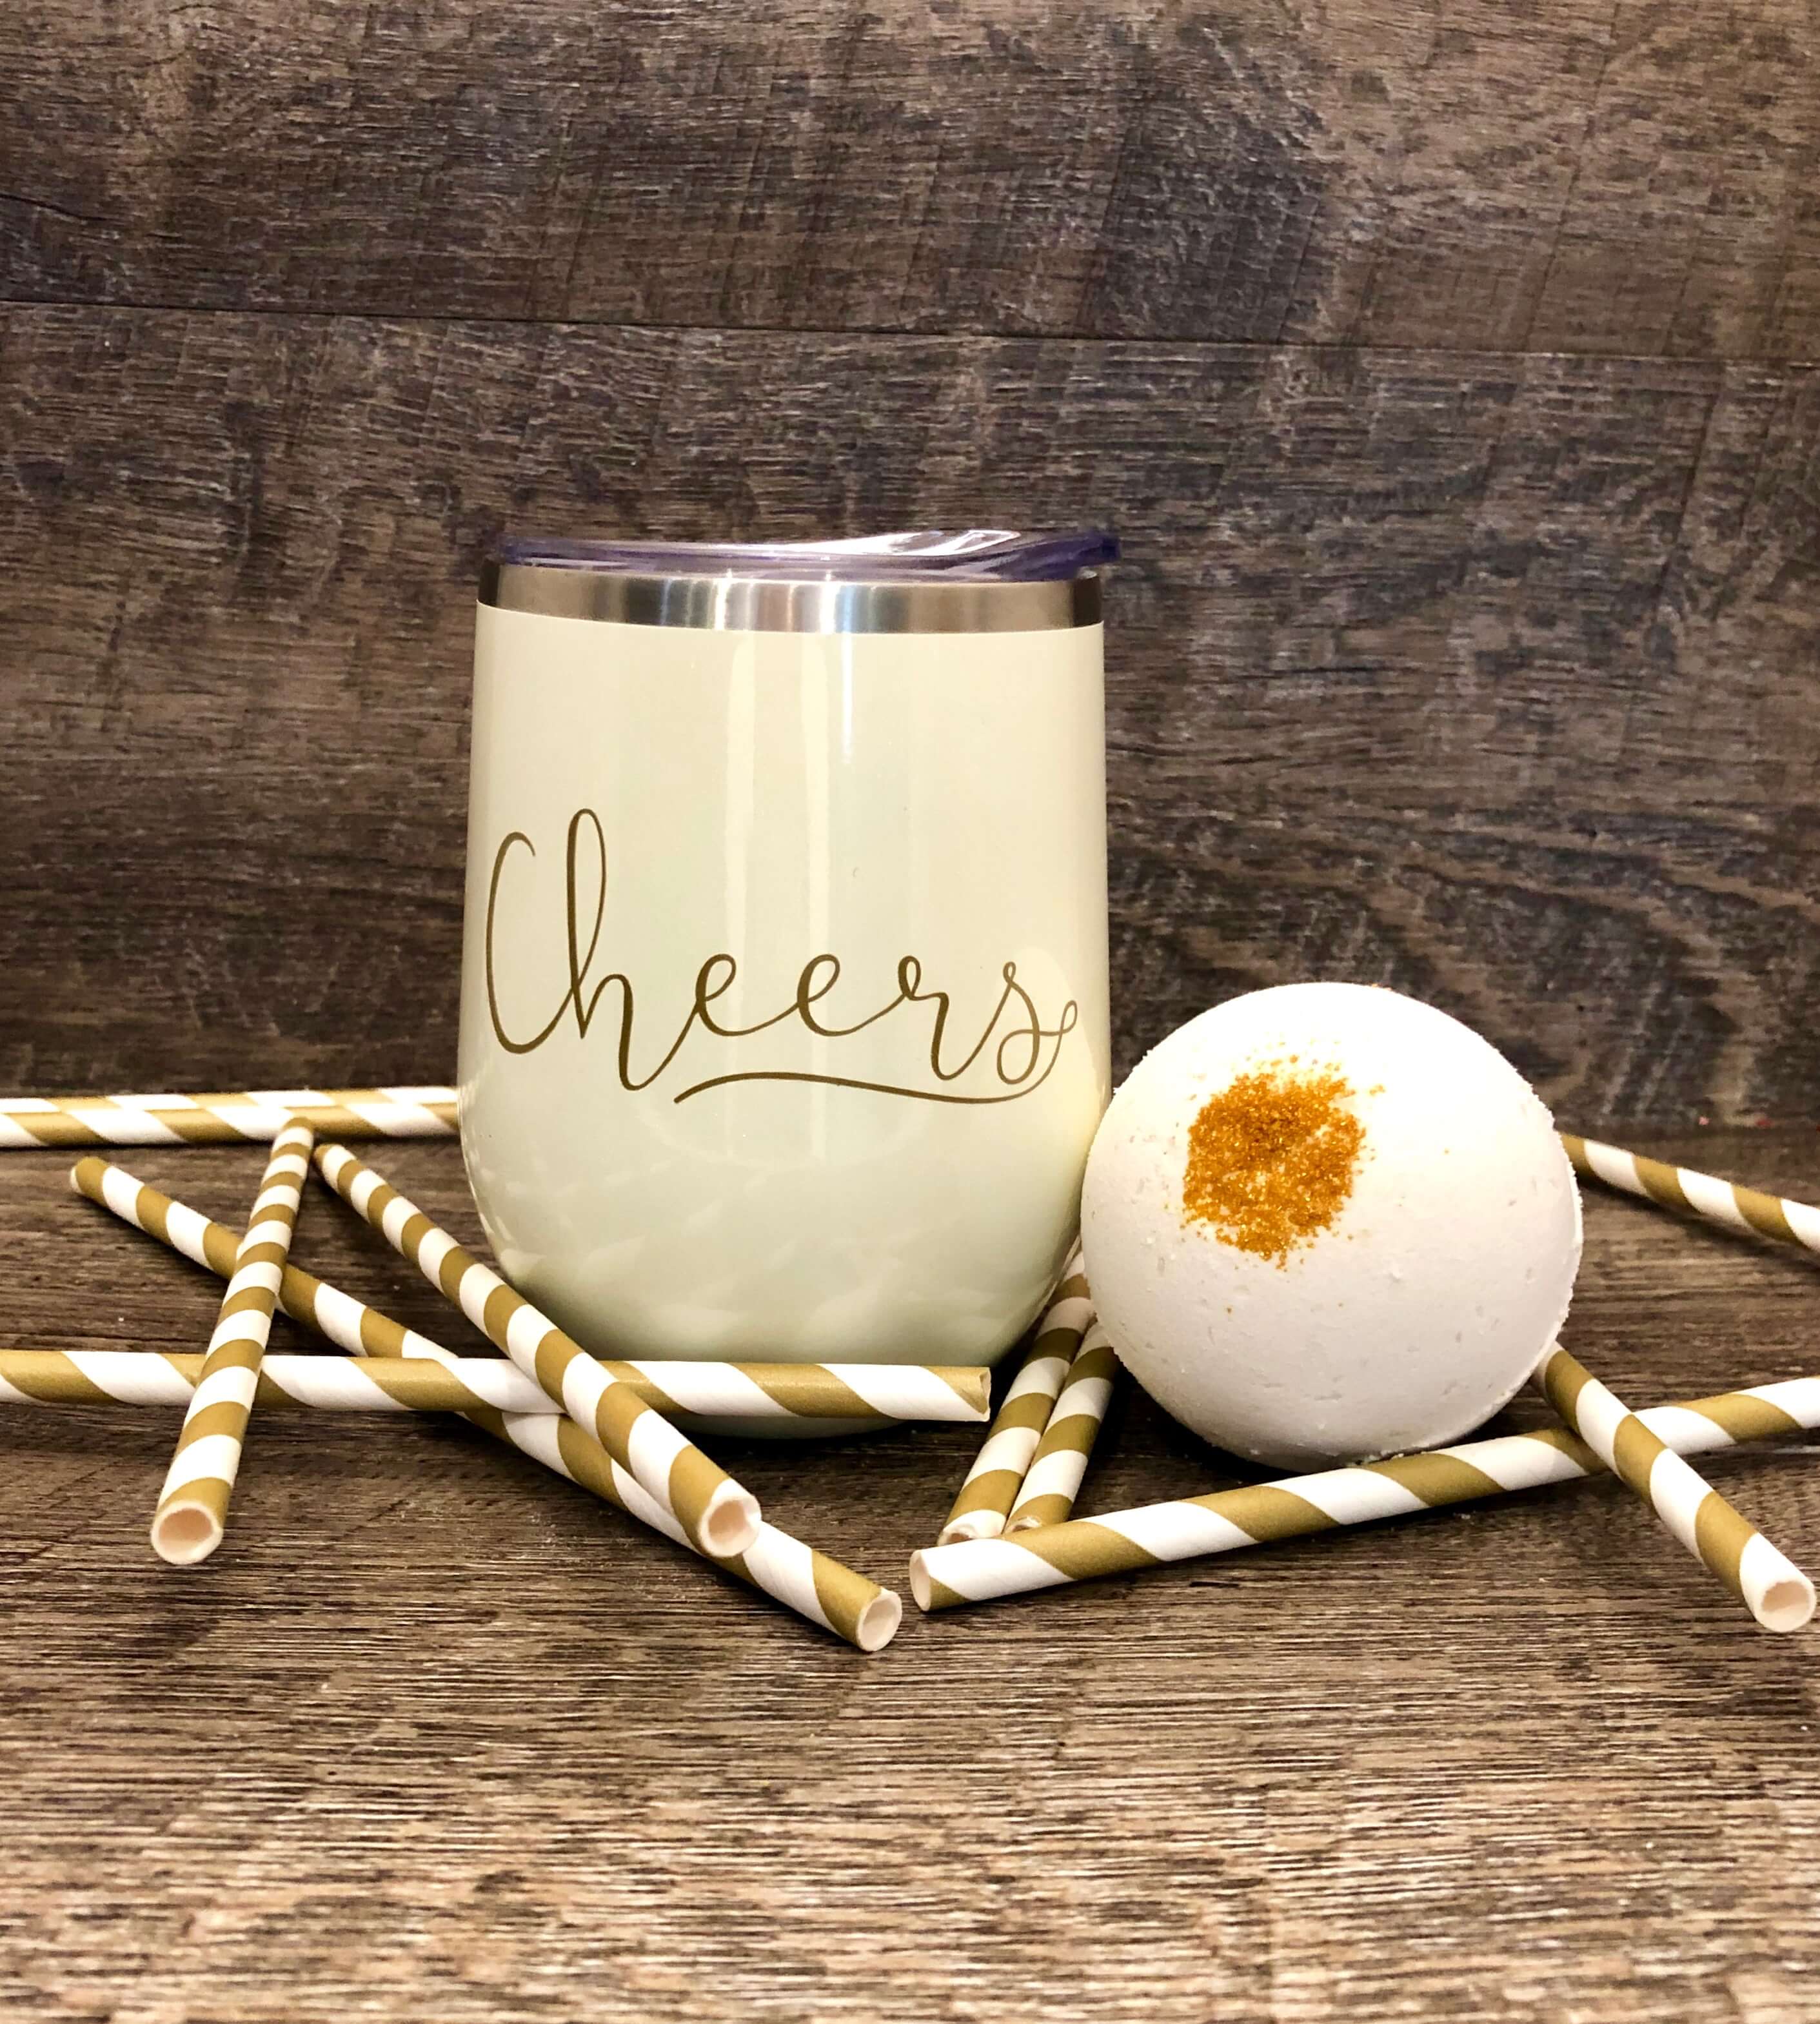 CELEBRATION BOX Gift Set | CHEERS "champagne" Scented - Side Hustle Serenity